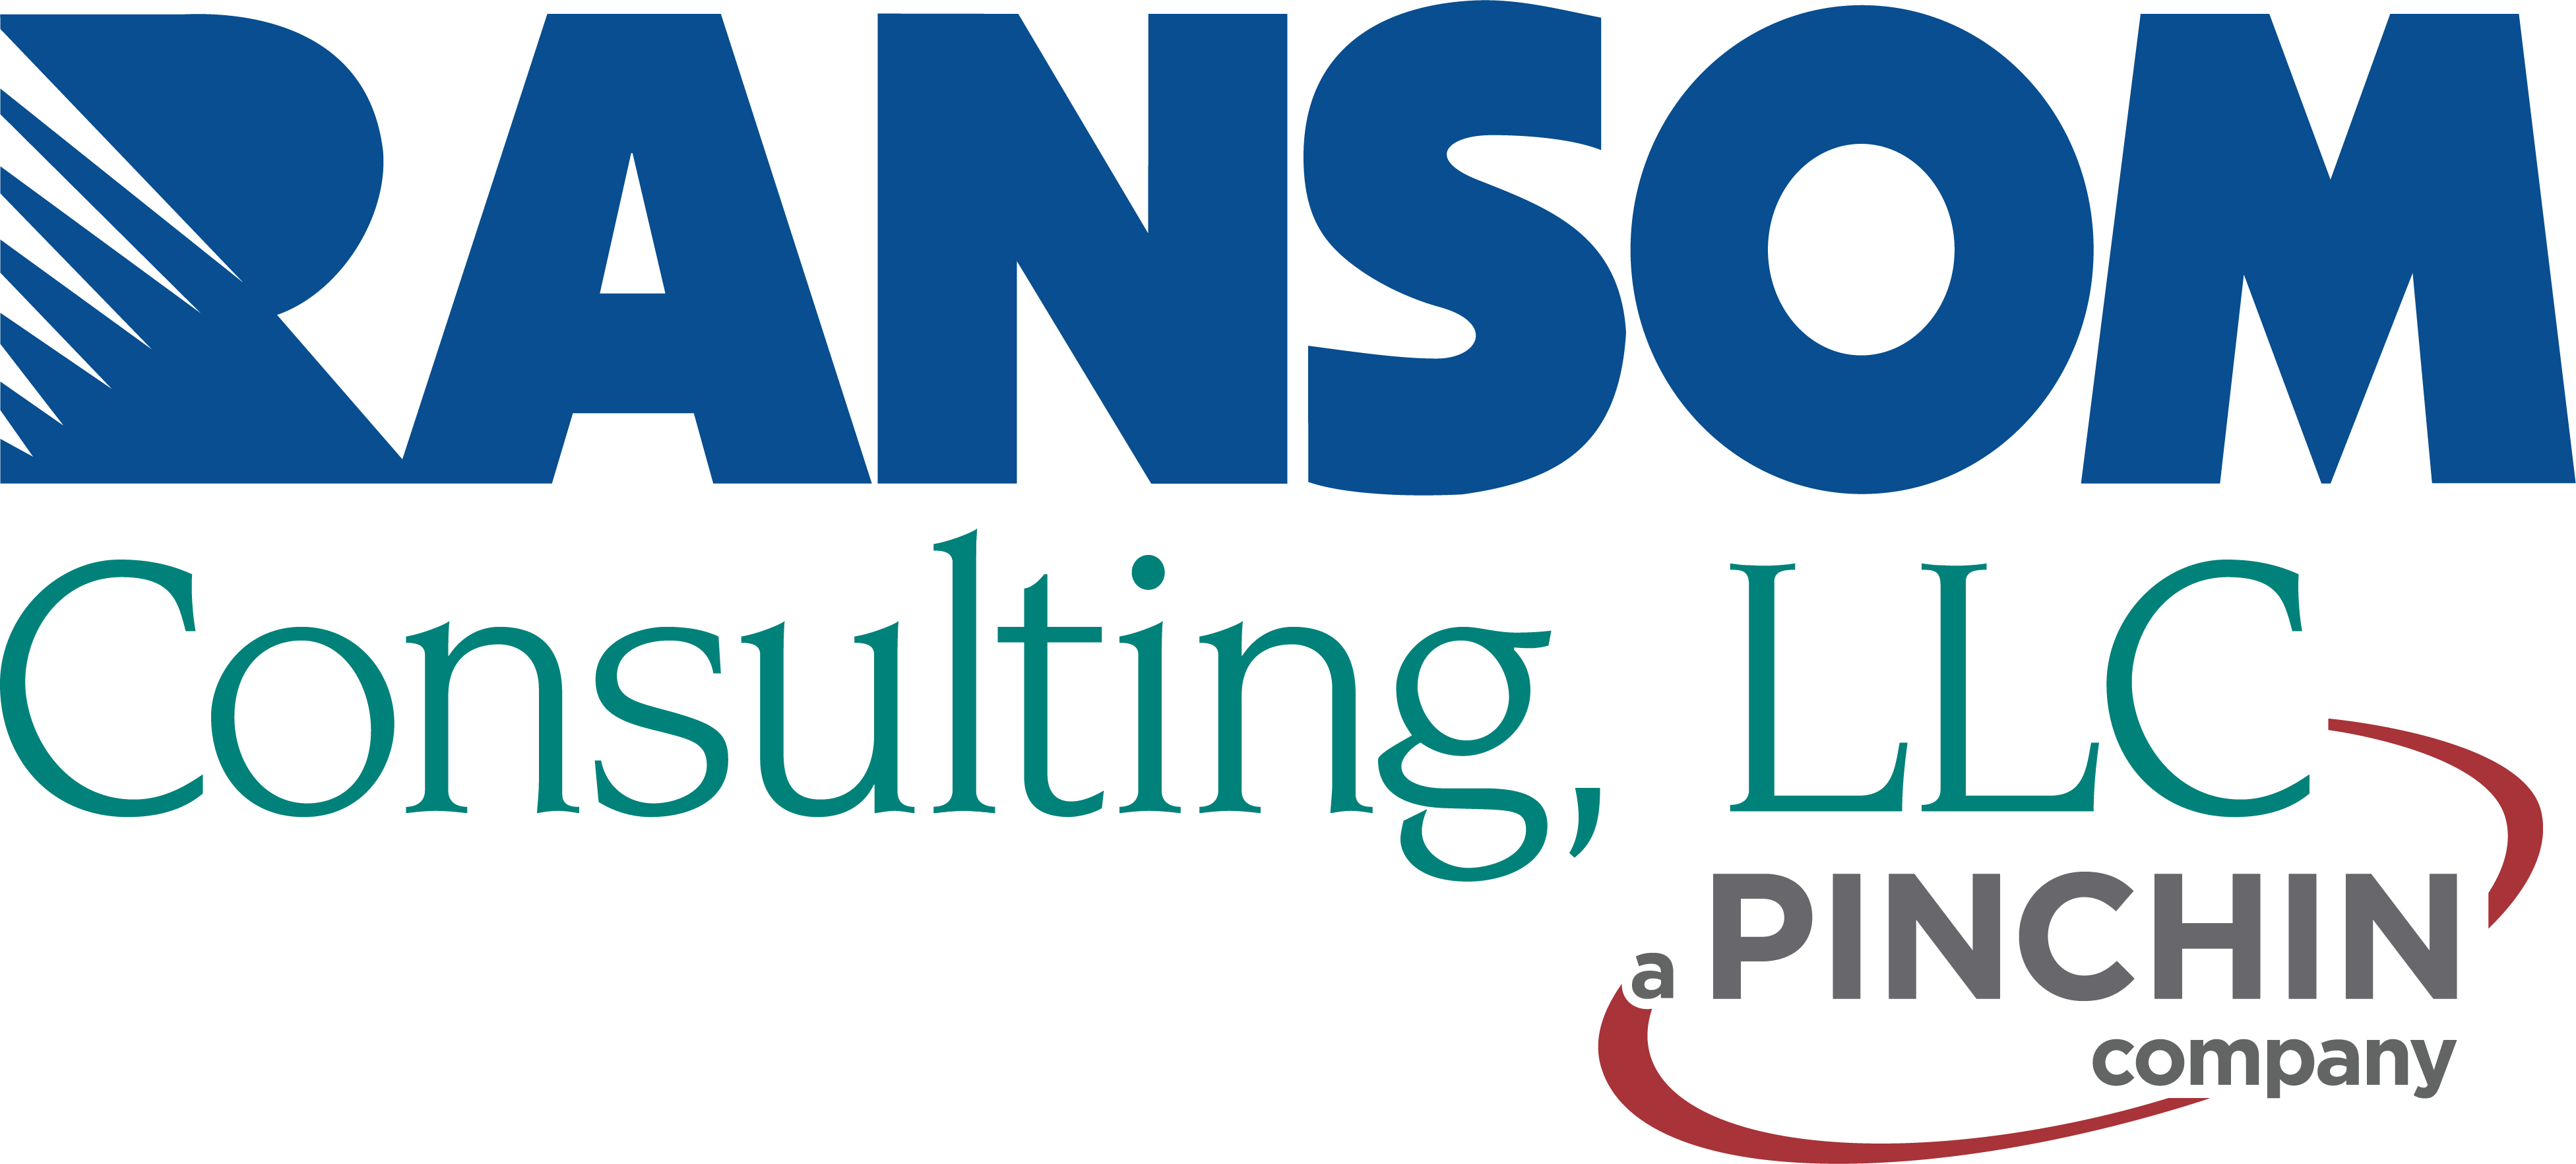 Ransom Consulting Cobranding Png